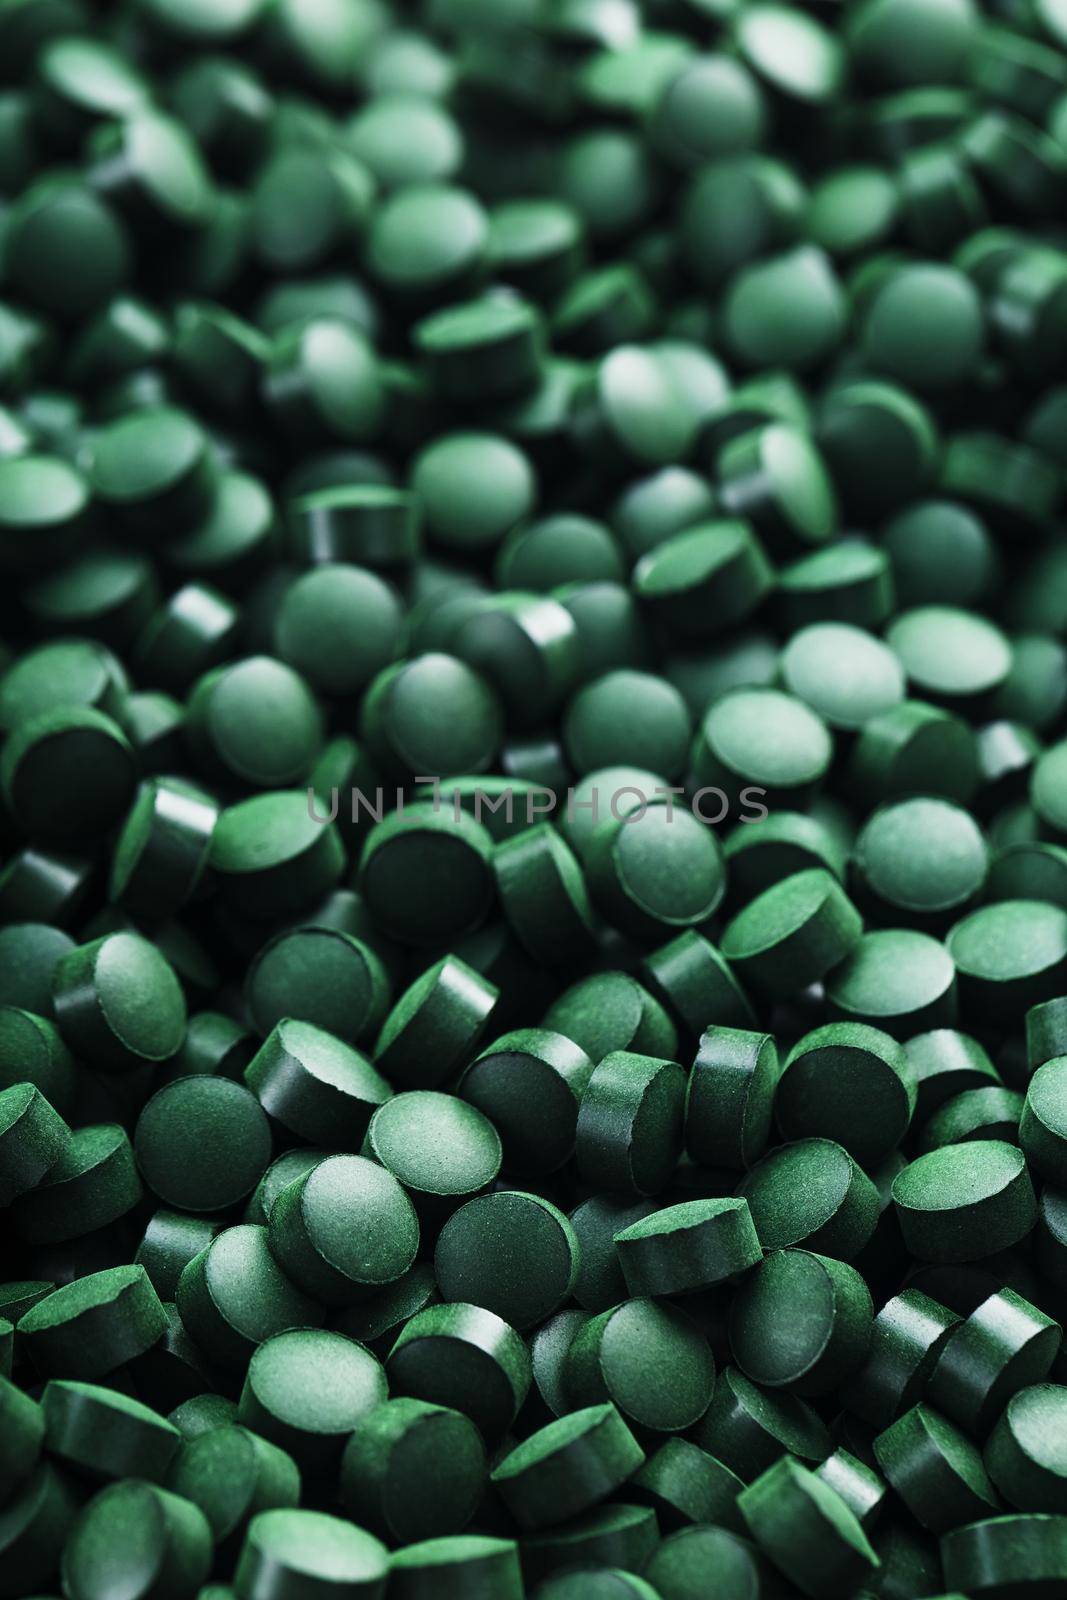 Green tablets from spirulina vegetarian dietary supplement by AlexGrec